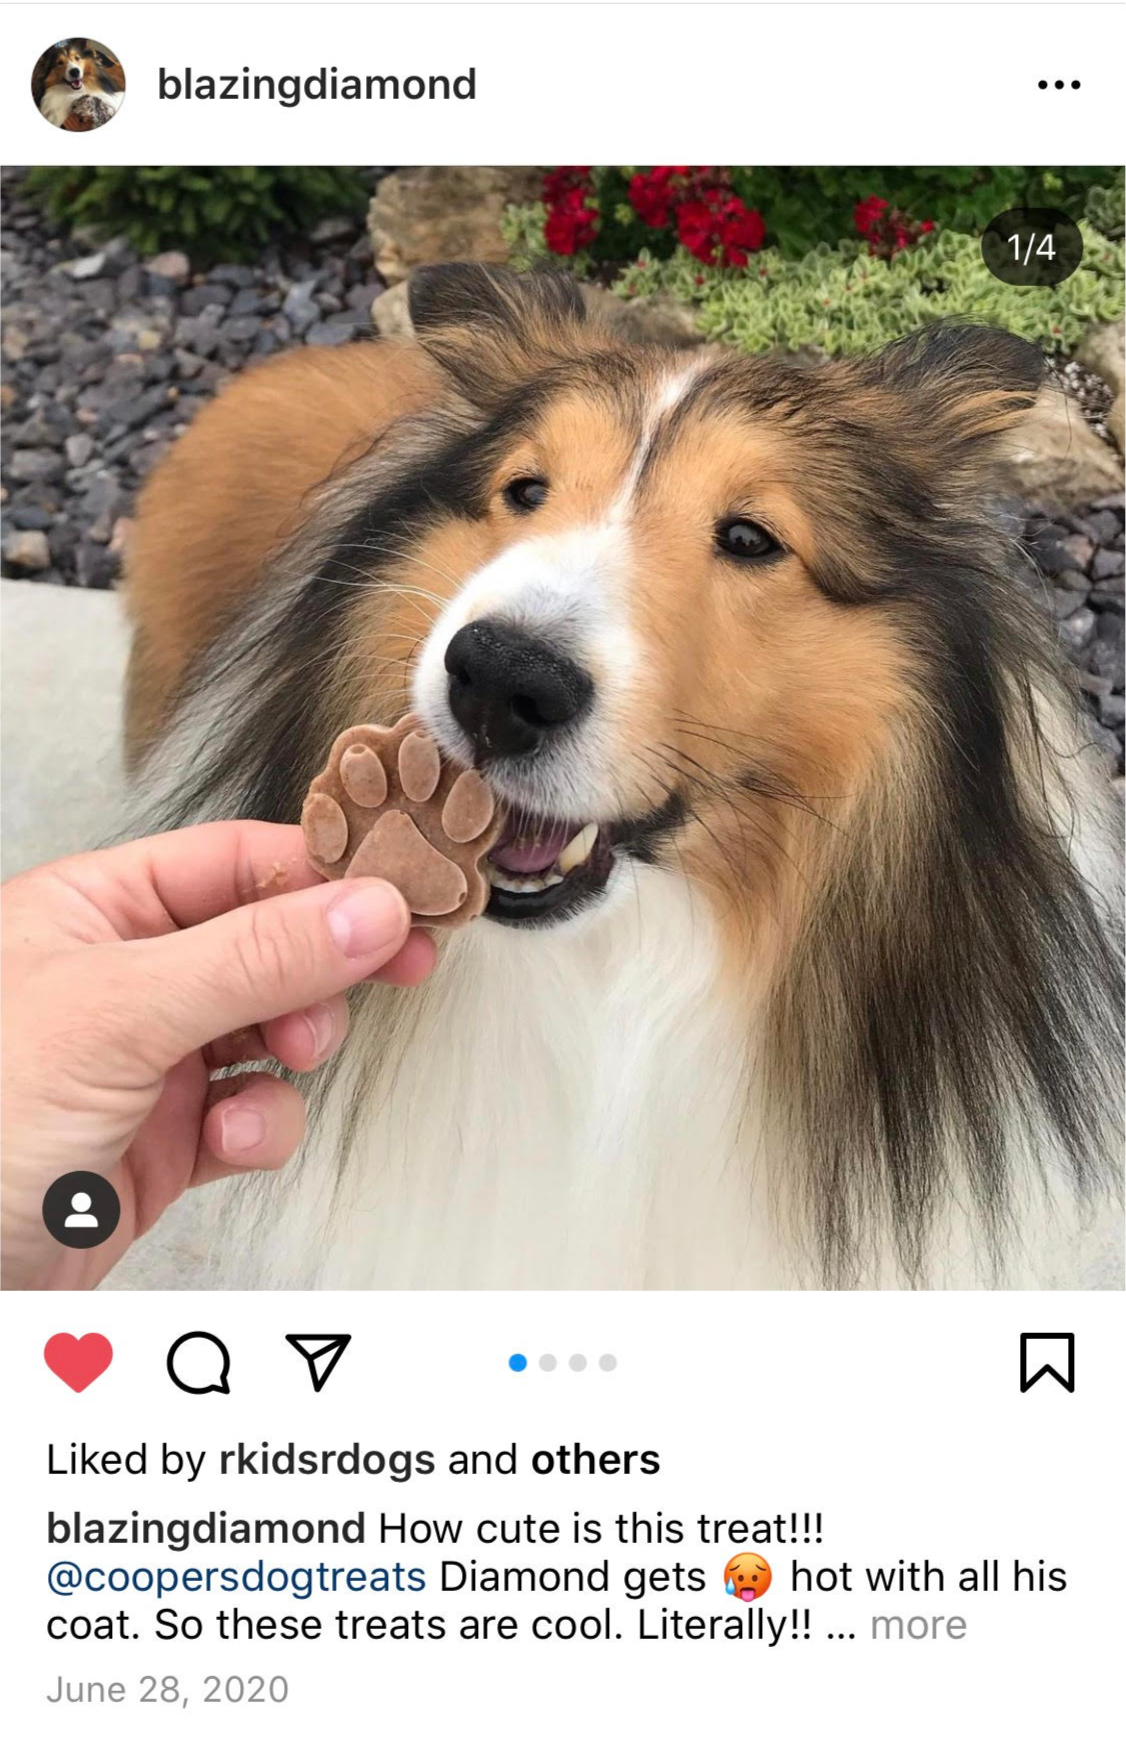 A screenshot of someone posting (on Instagram) a picture of their dog eating Cooper's Treats 